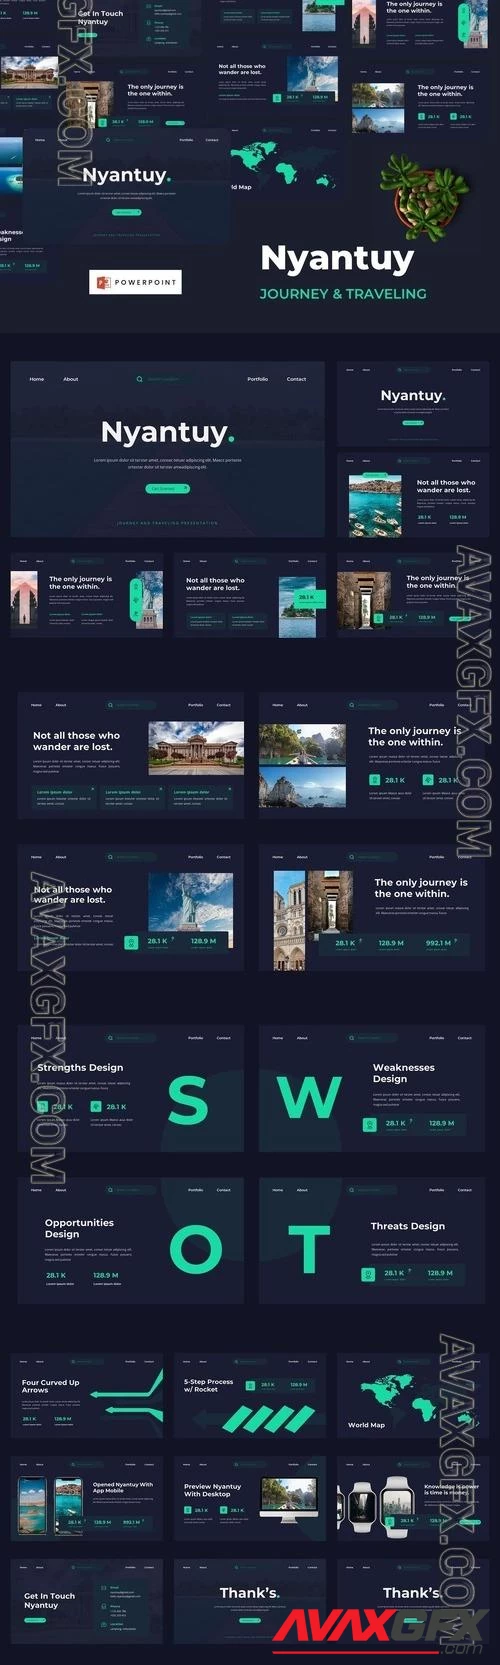 Nyantuy - Journey & Traveling Powerpoint Template PPTX